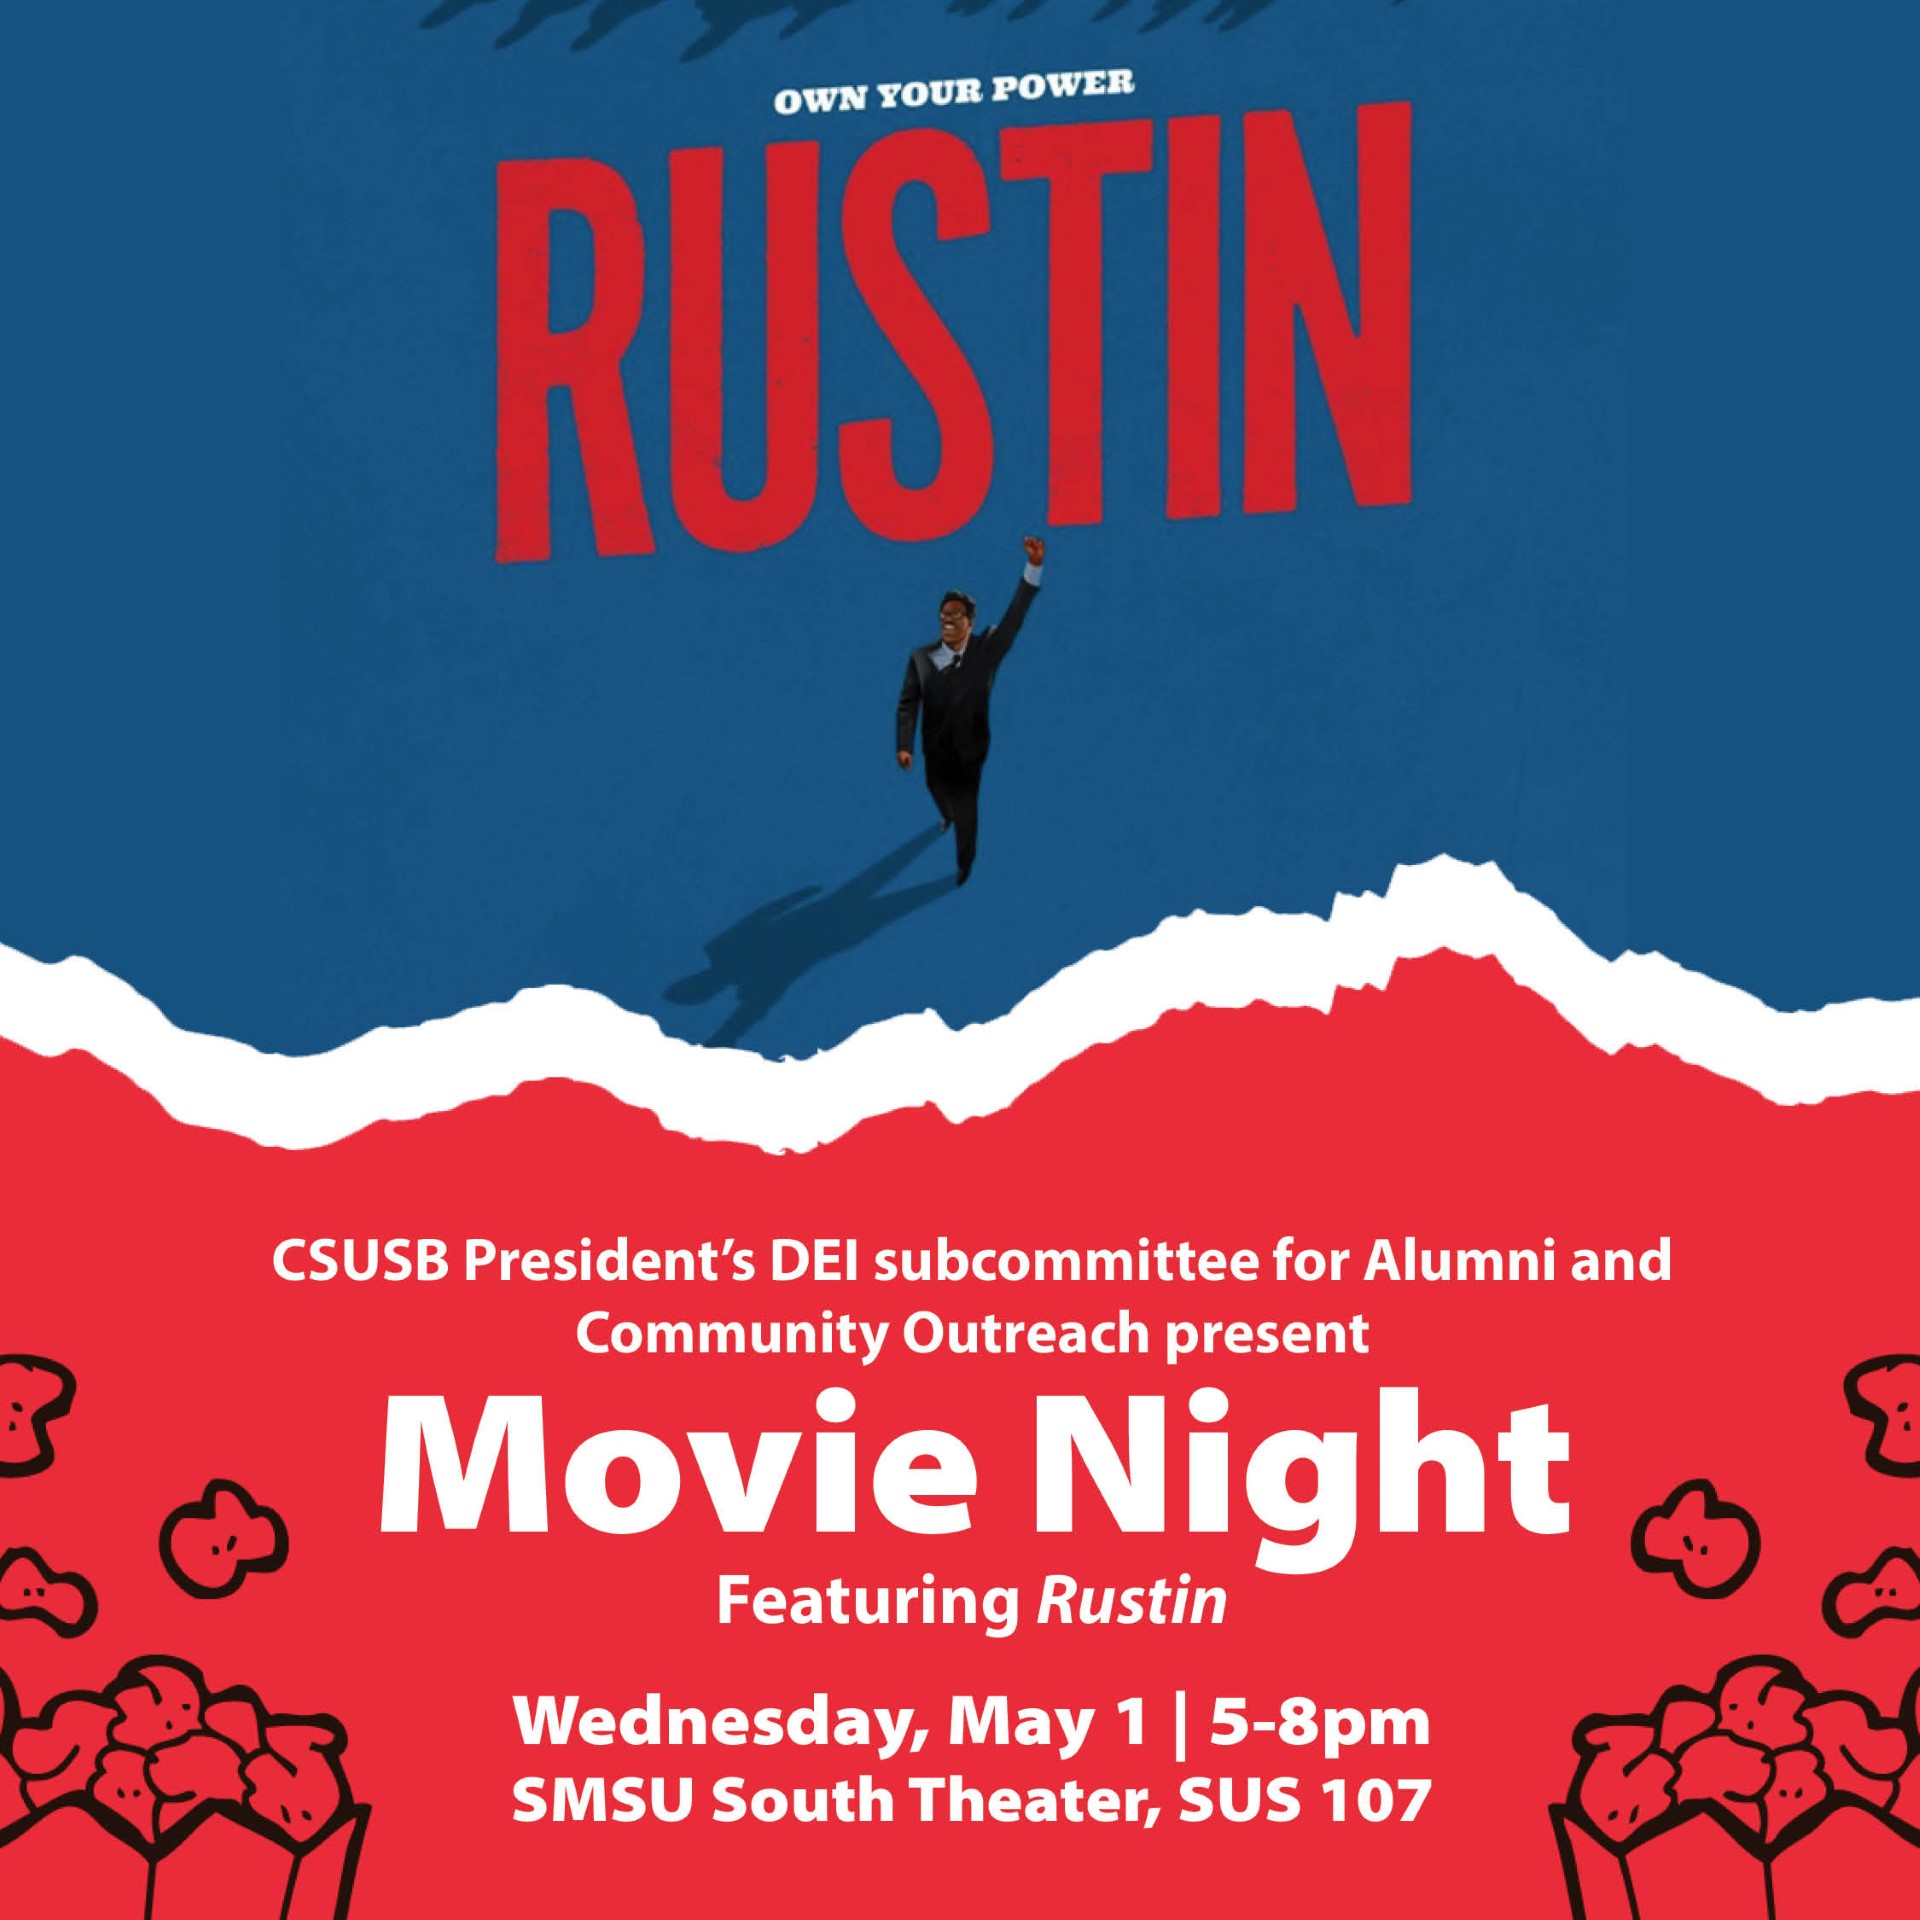 Graphic depicts man standing with fist raised.  Popcorn buckets on the bottom corners.  Reads: CSUSB President's DEI subcommittee for Alumni and Community Outreach present Movie Night featuring Rustin.  Wednesday, May 1, 5-8pm, SMSU South Theater, SUS 107